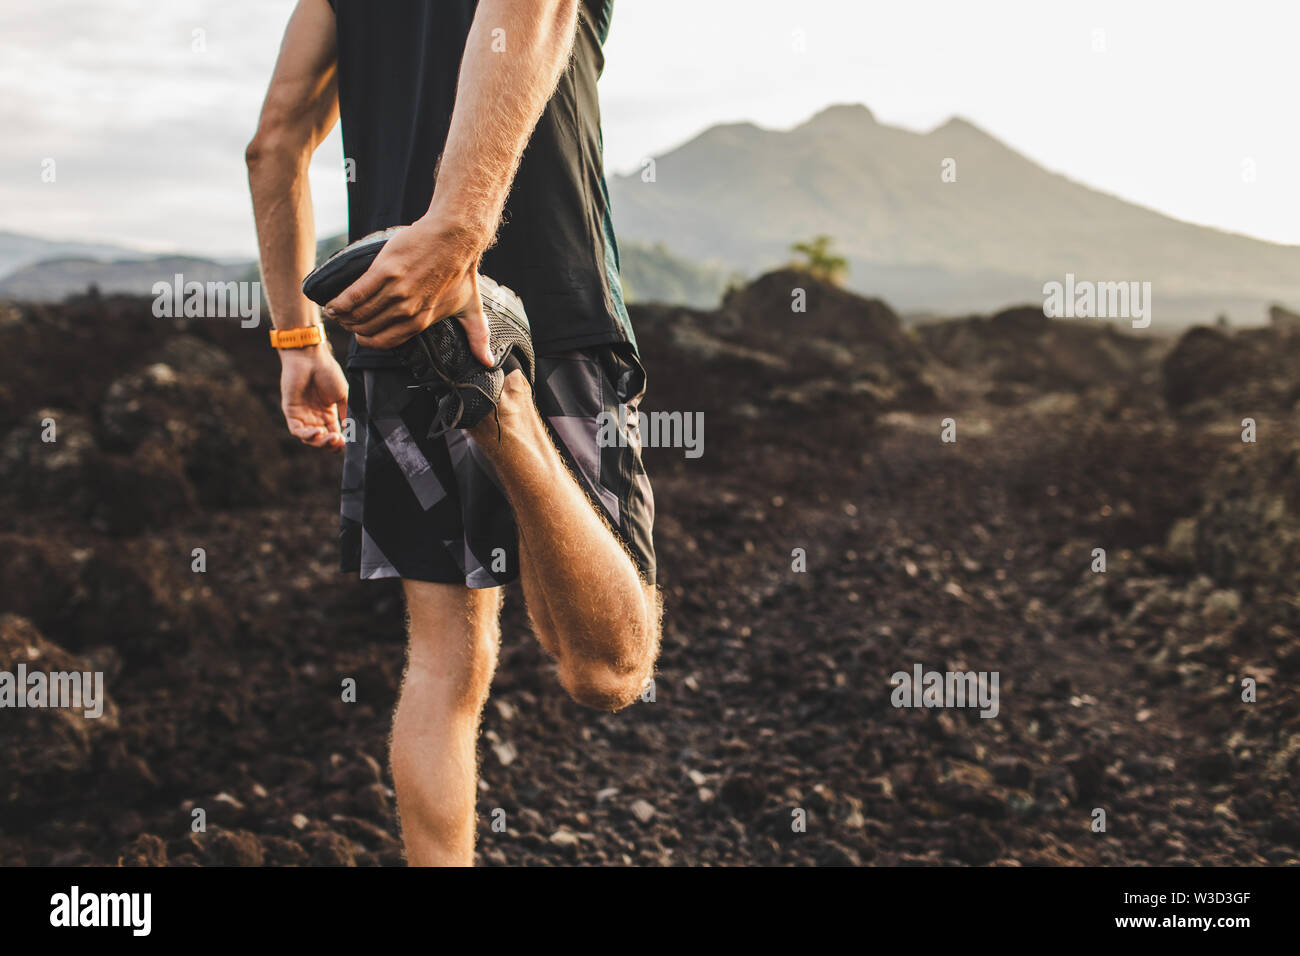 Runner stretching leg and feet and preparing for trail running outdoors. Active and healthy lifestyle concept. Mountain view on background. Stock Photo